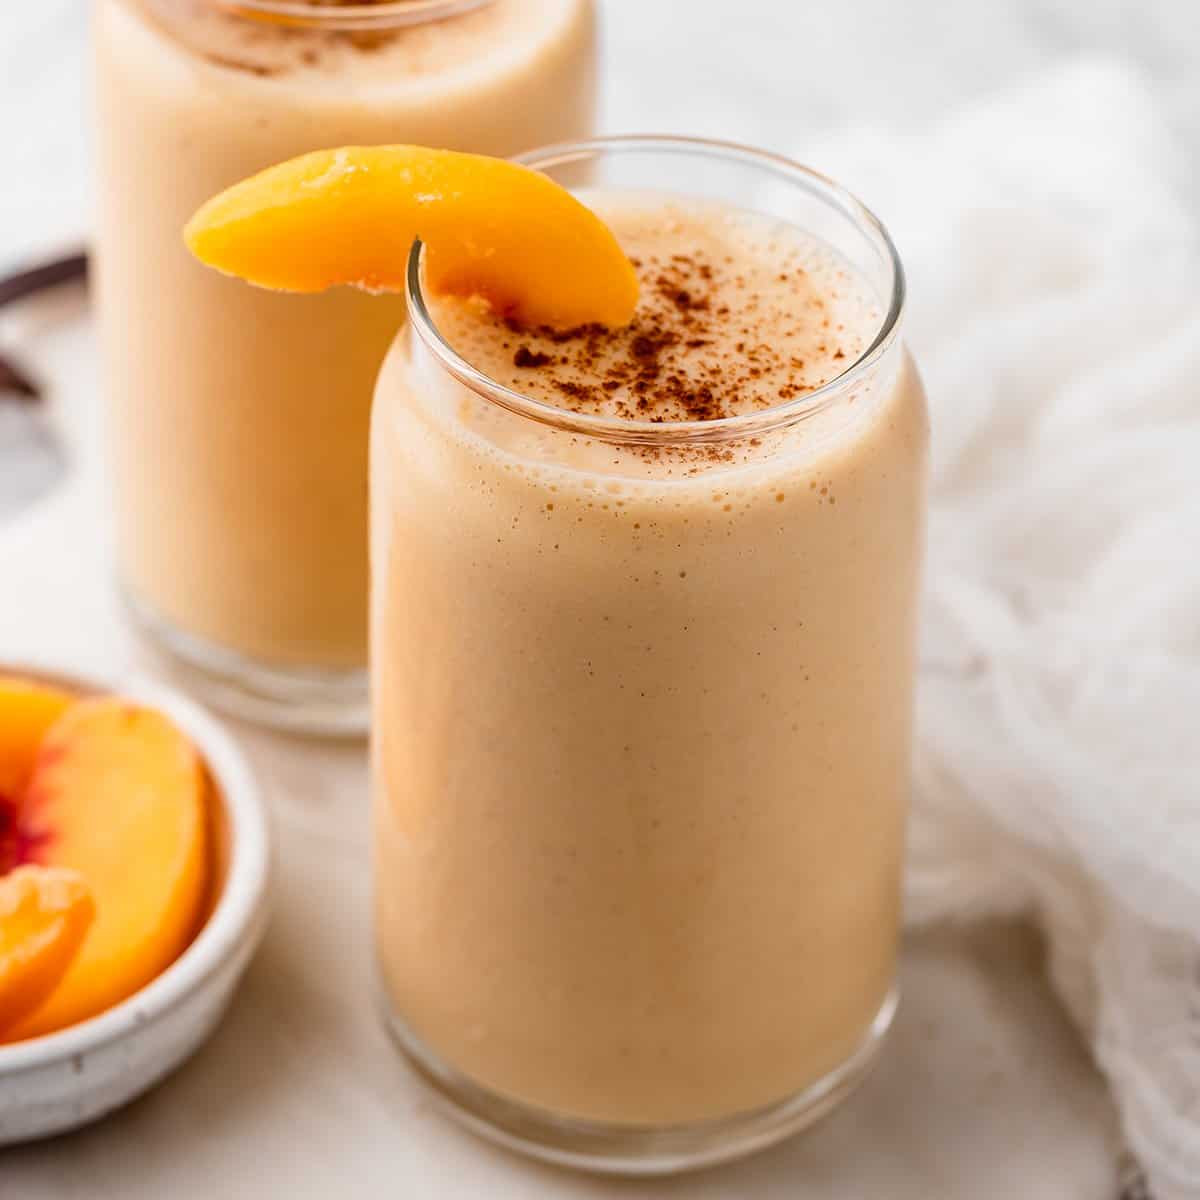 a glass of Peach Smoothie garnished with peach slices and sprinkled with cinnamon